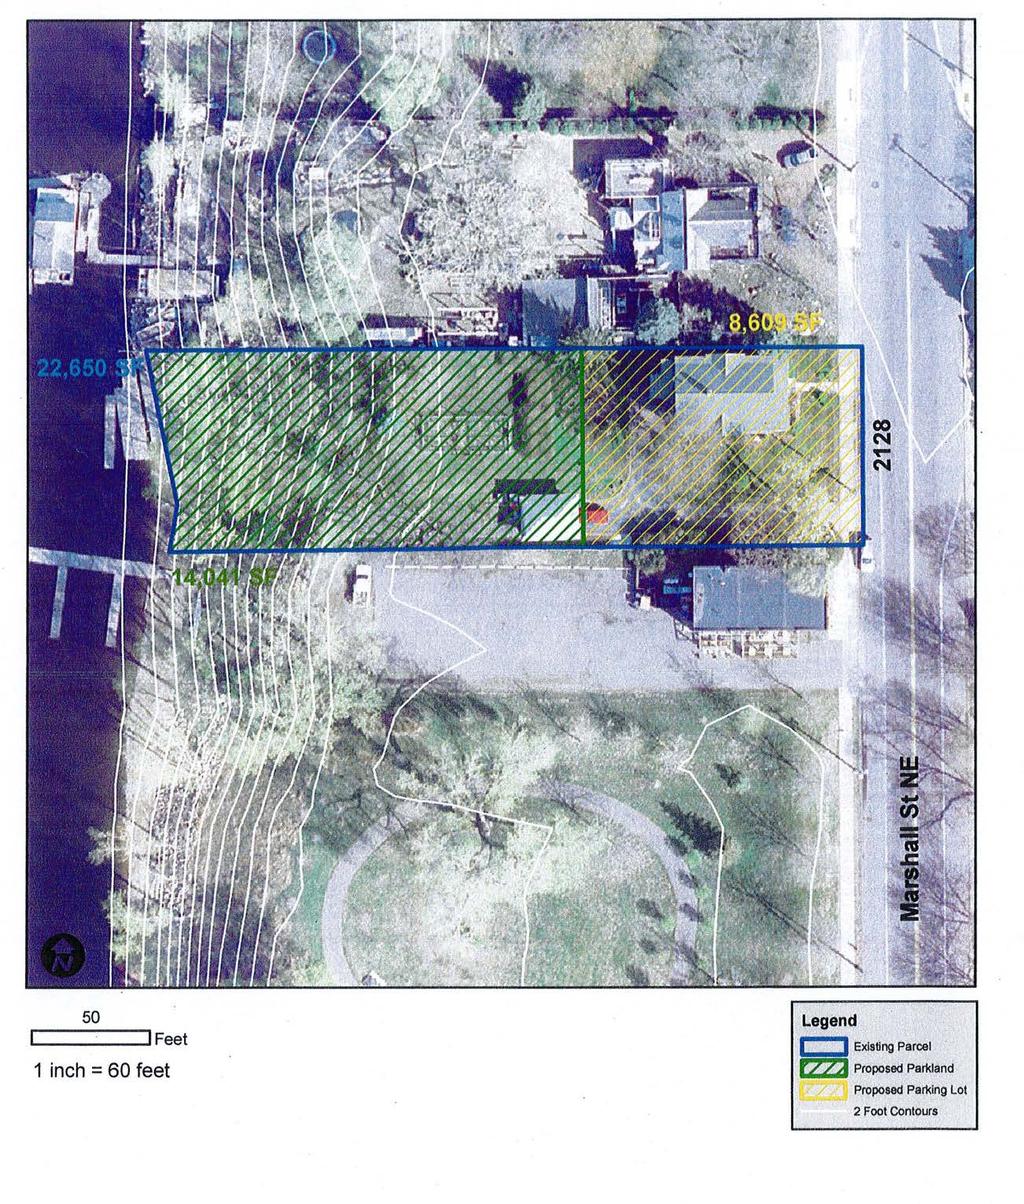 Attachment 3: Aerial Photo of Minneapolis Park and Recreation Board Property Acquisition in Above the